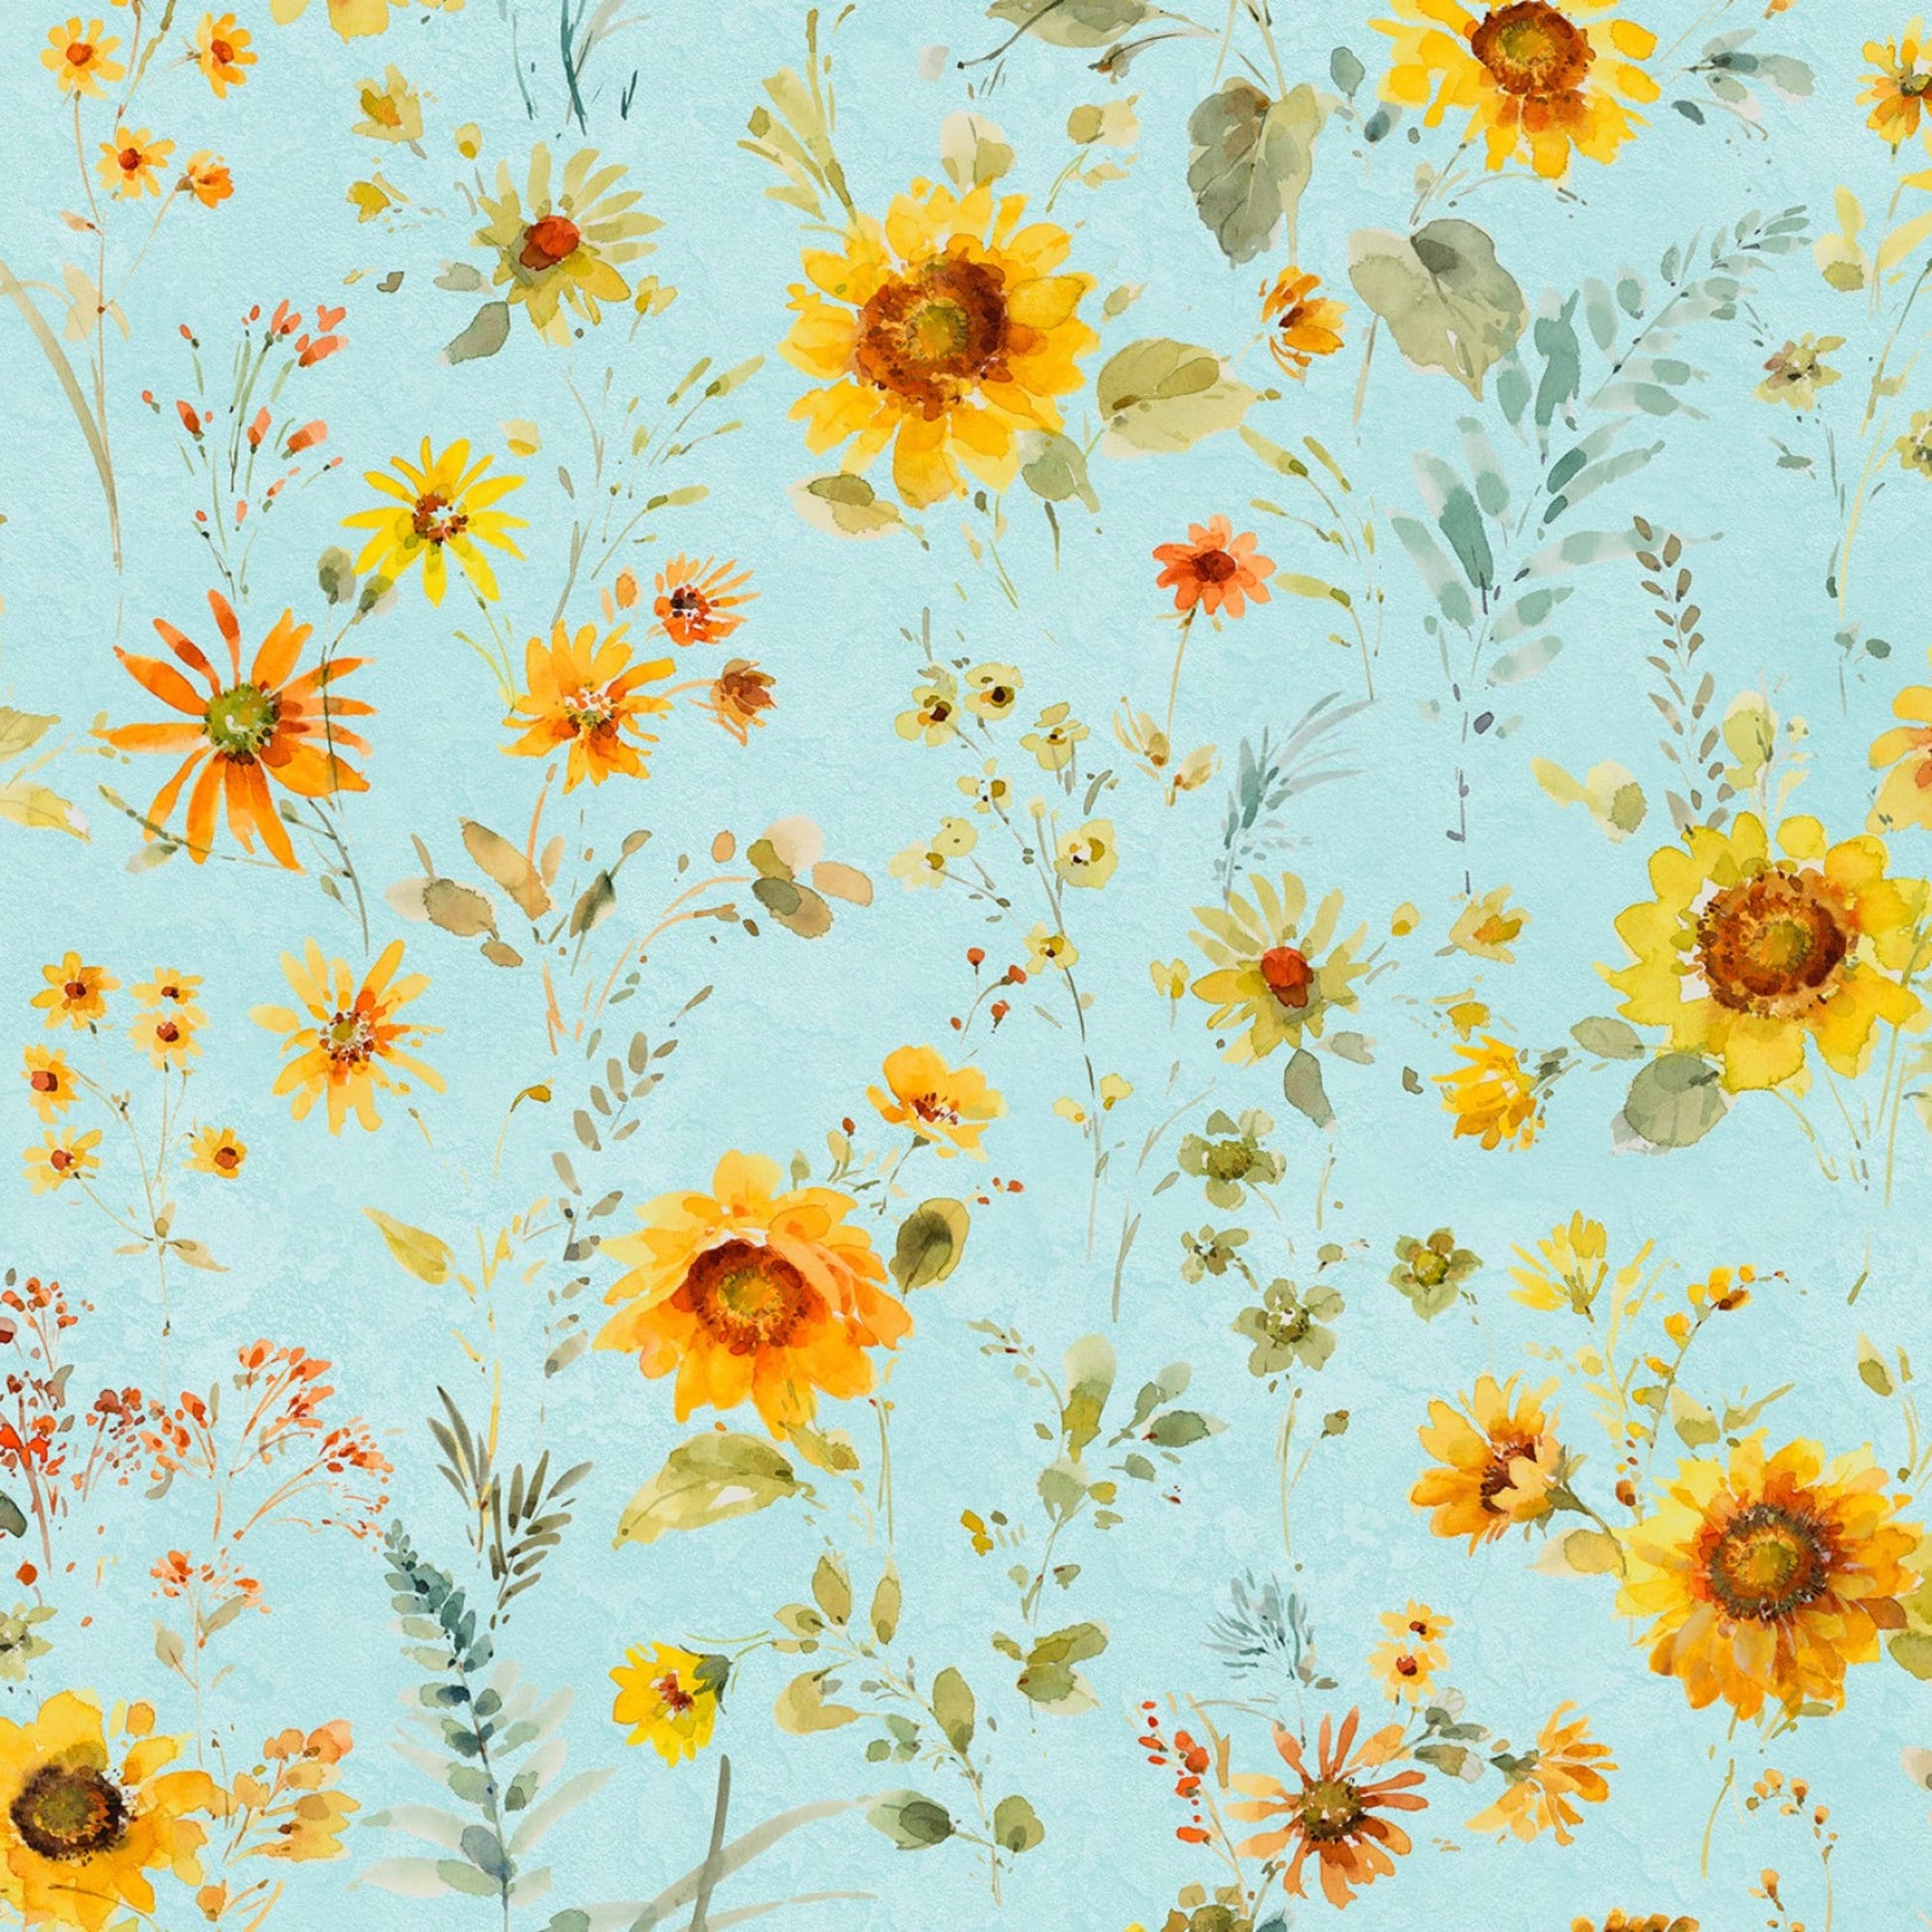 Wilmington Prints Teal (light) / FQ (18"x21") Floral Sunflowers on teal or light teal, Fabric by the Yard from Wilmington Prints Sunflower Sweet by Lisa Audit